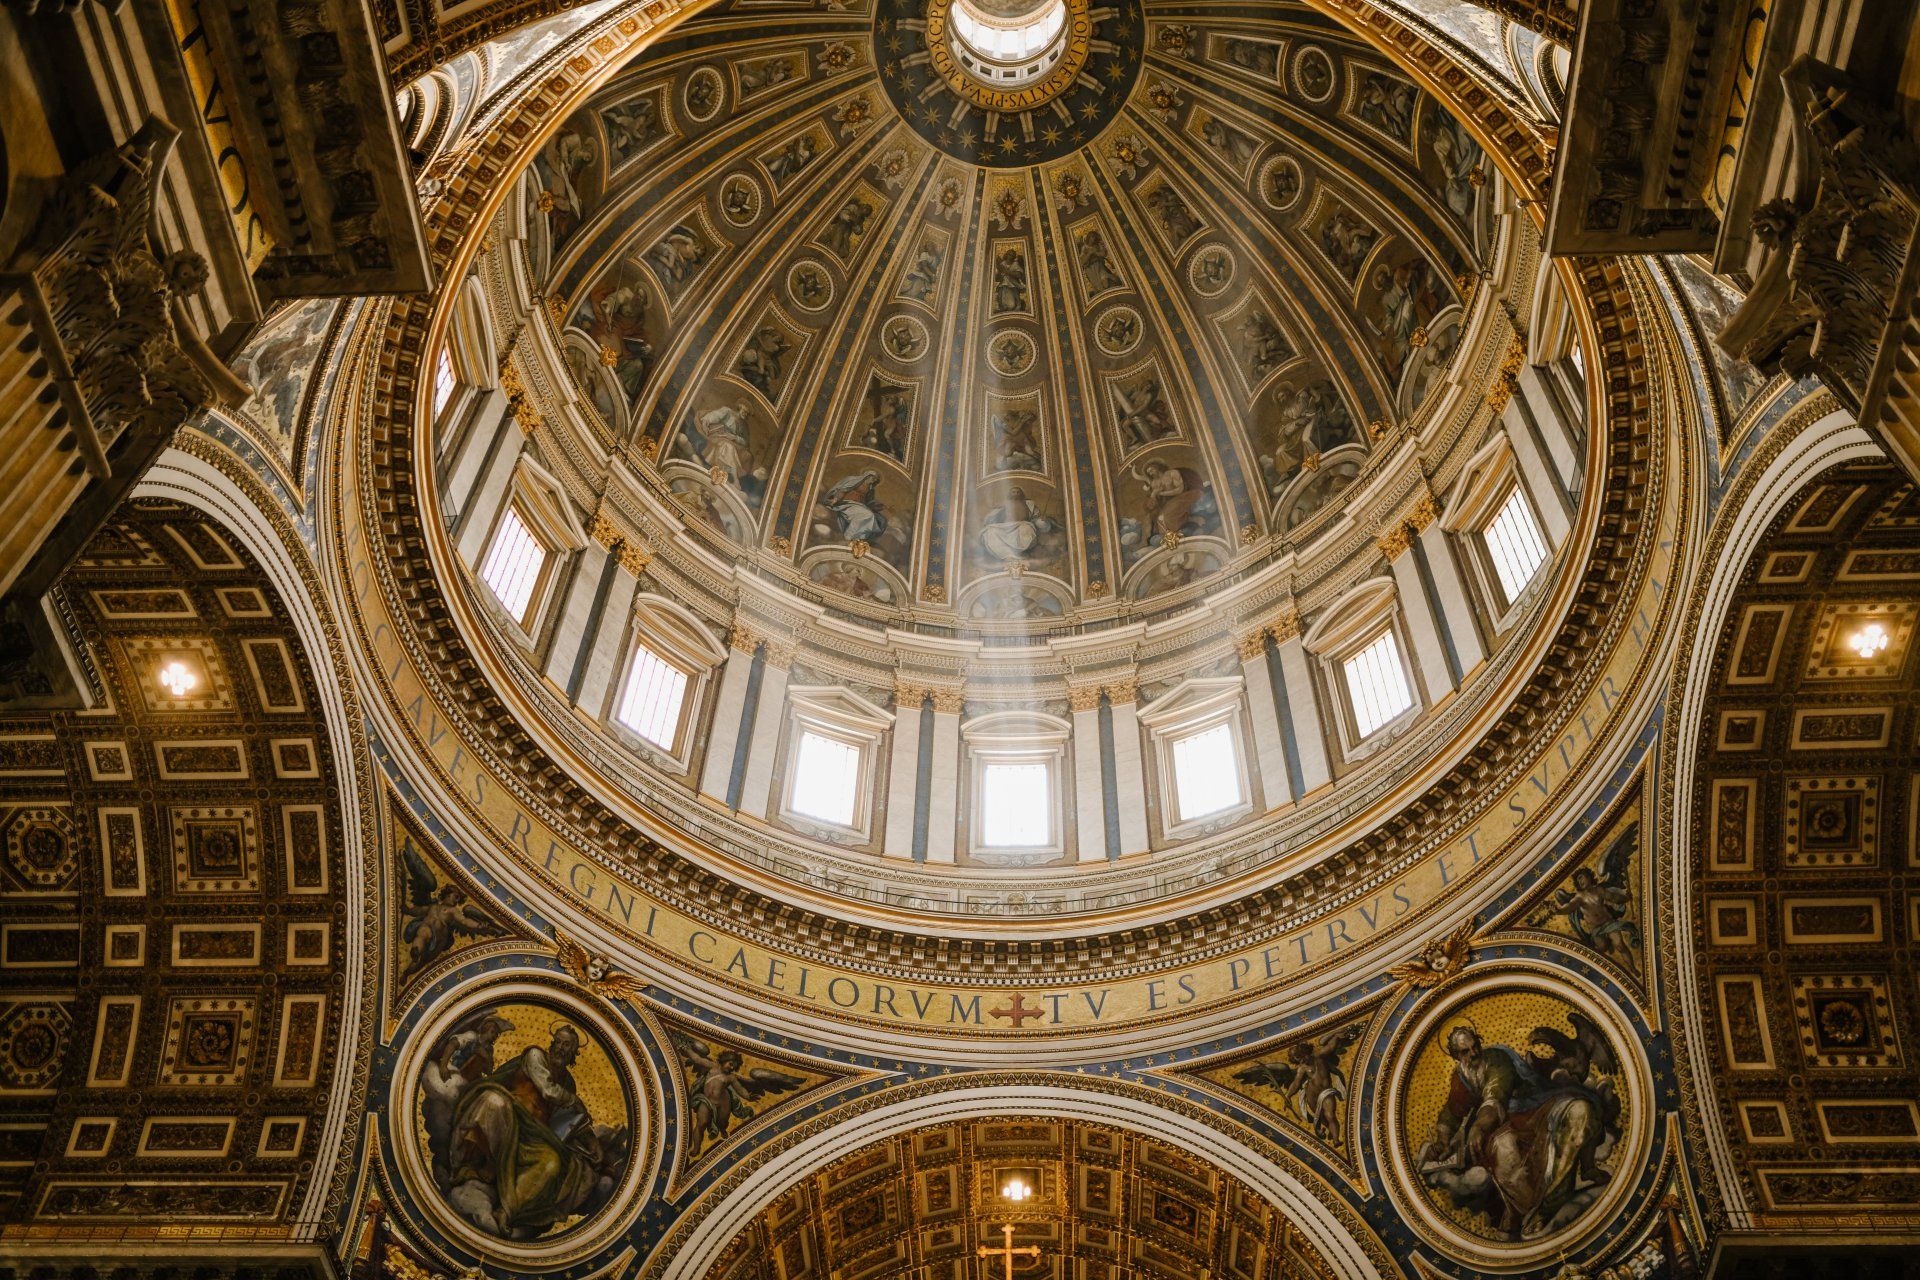 Looking up at the dome of st. peter 's basilica.